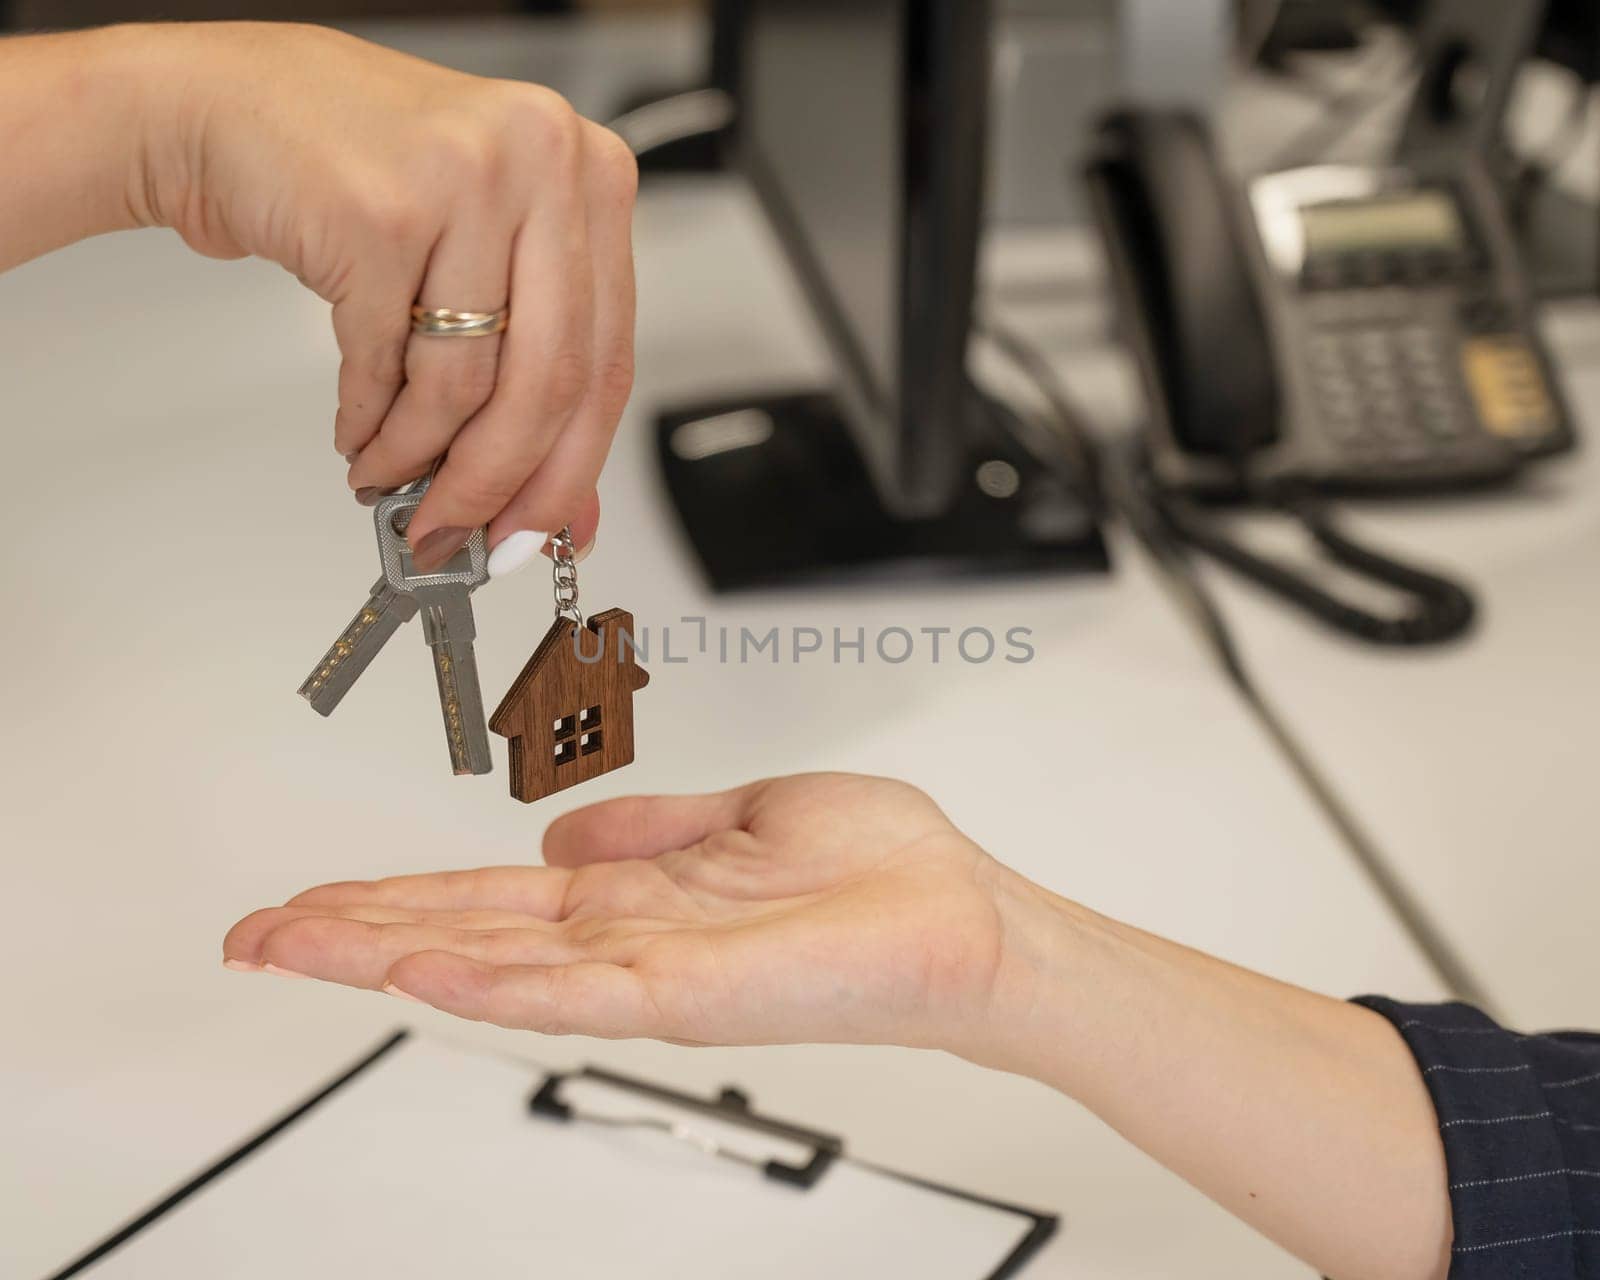 Real estate purchase transaction. The realtor hands the woman the keys to the house. Close-up of hands